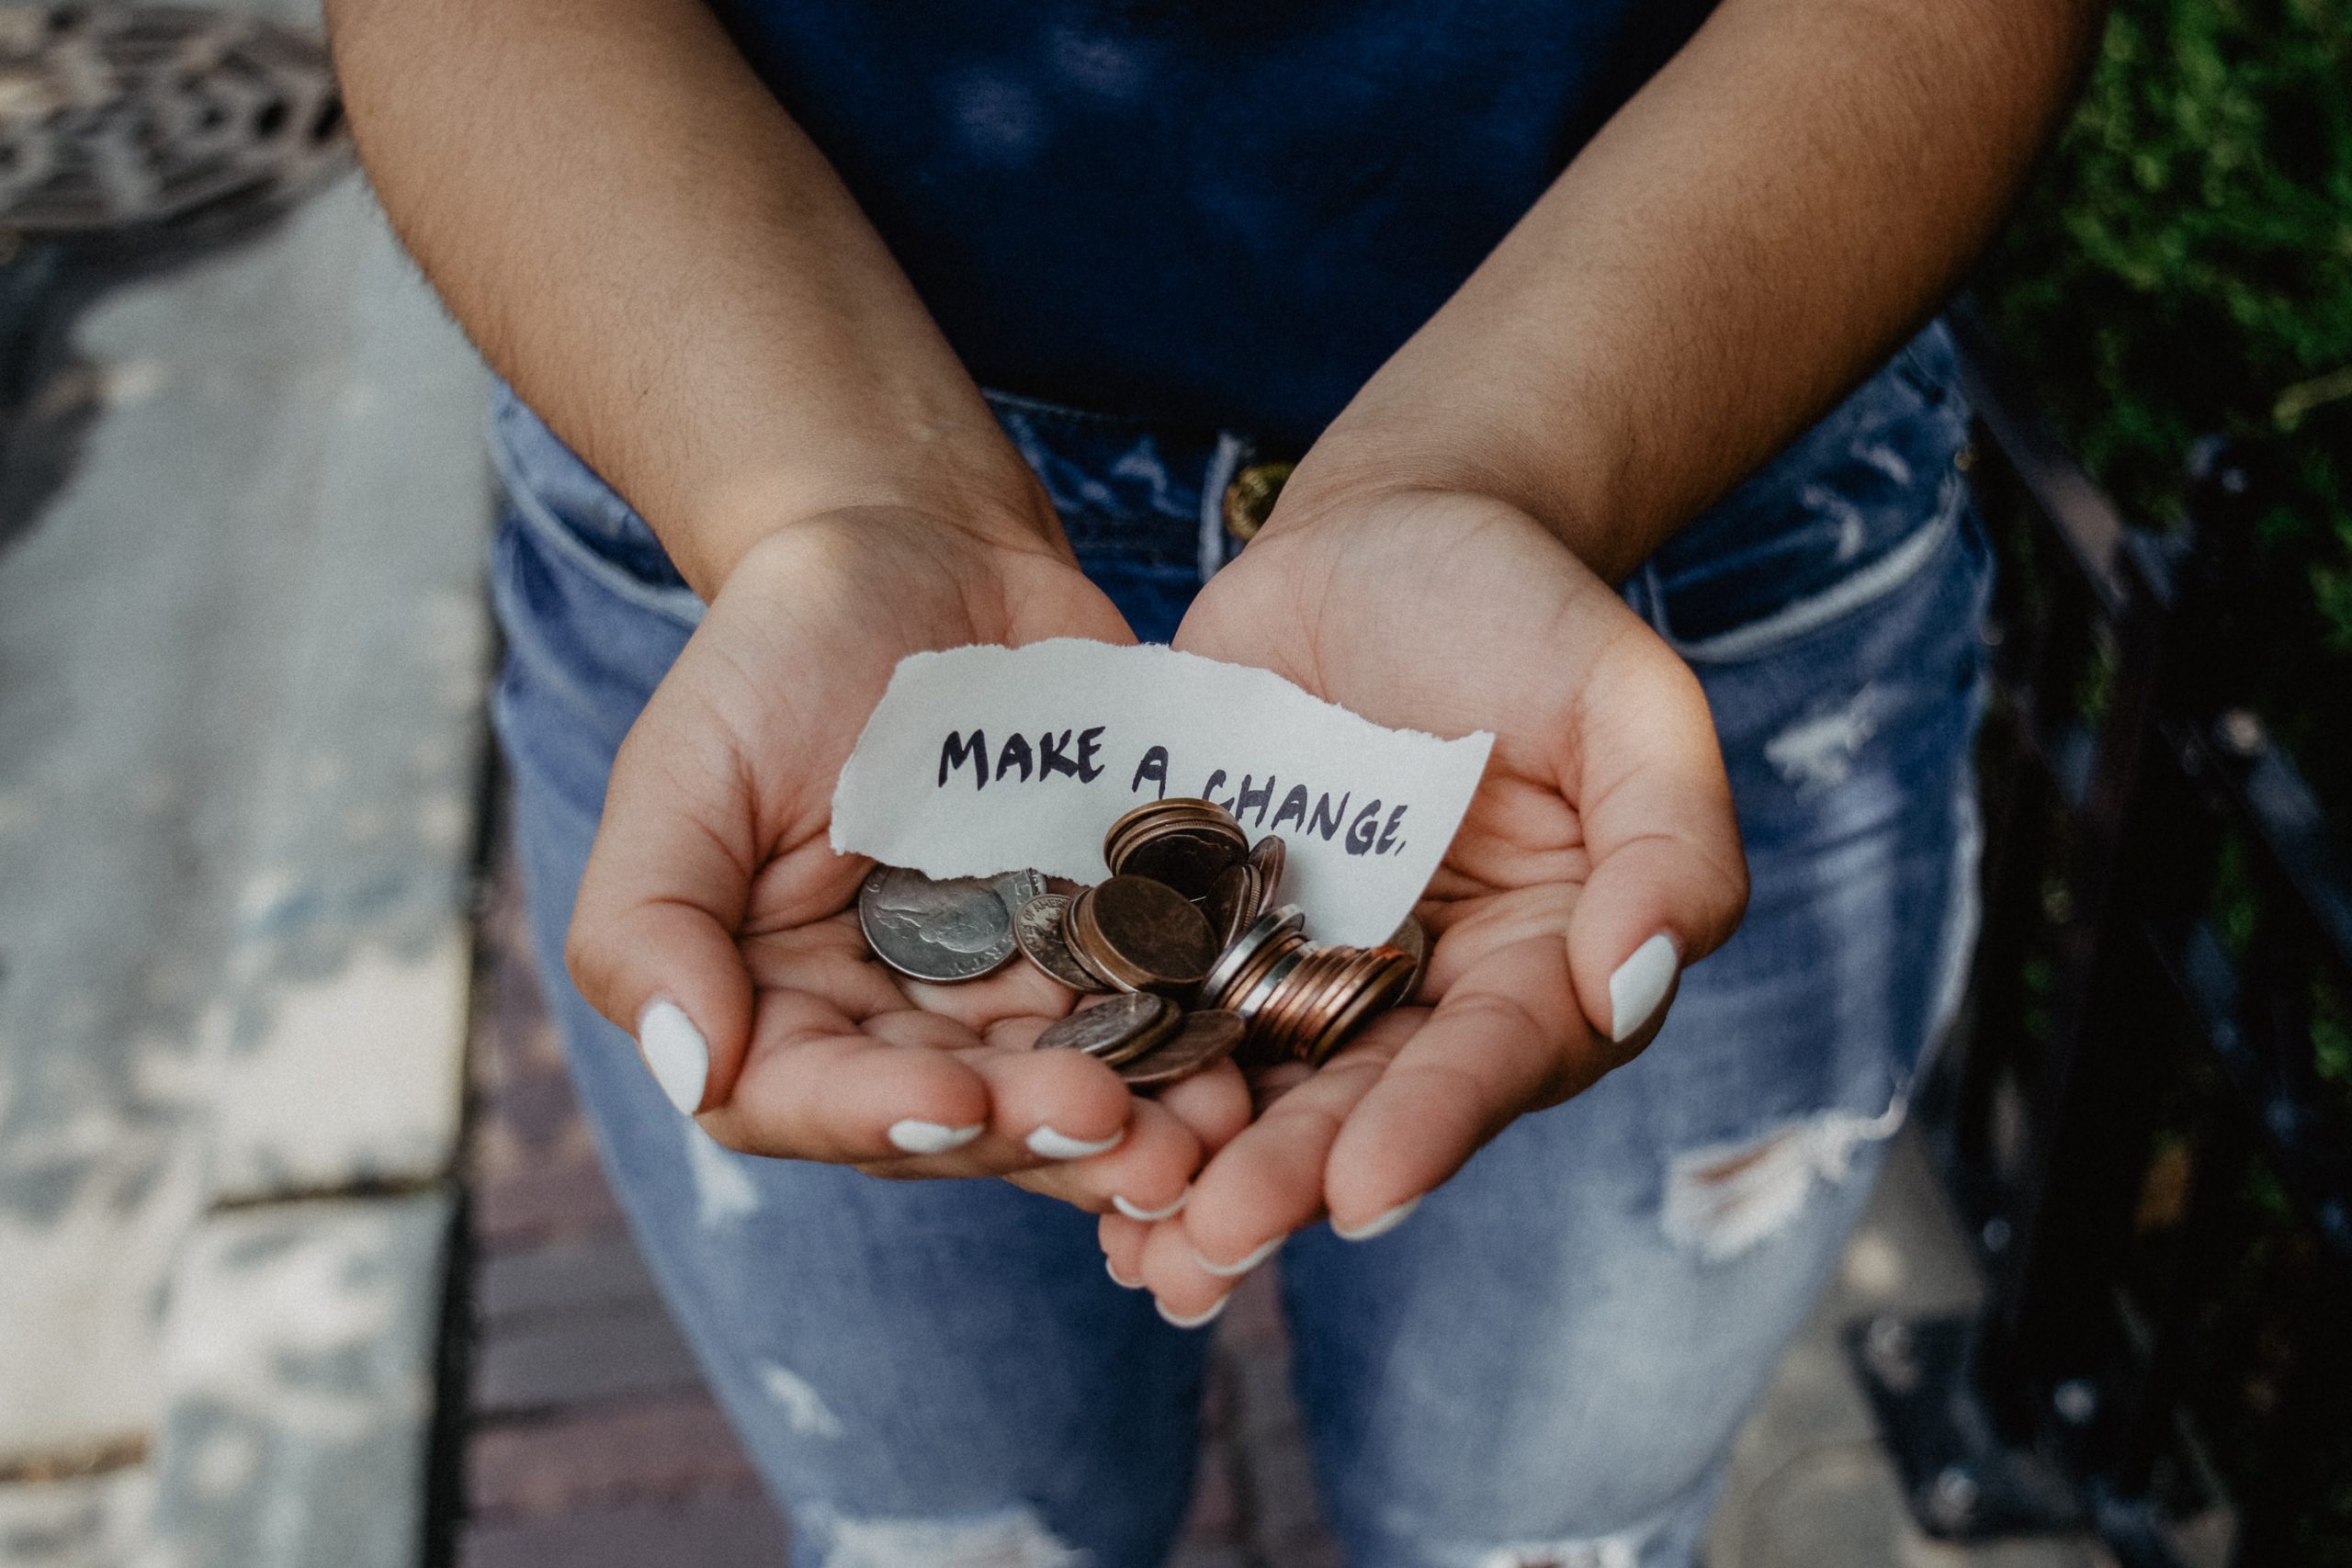 woman holding "make a change" note and coins in hands